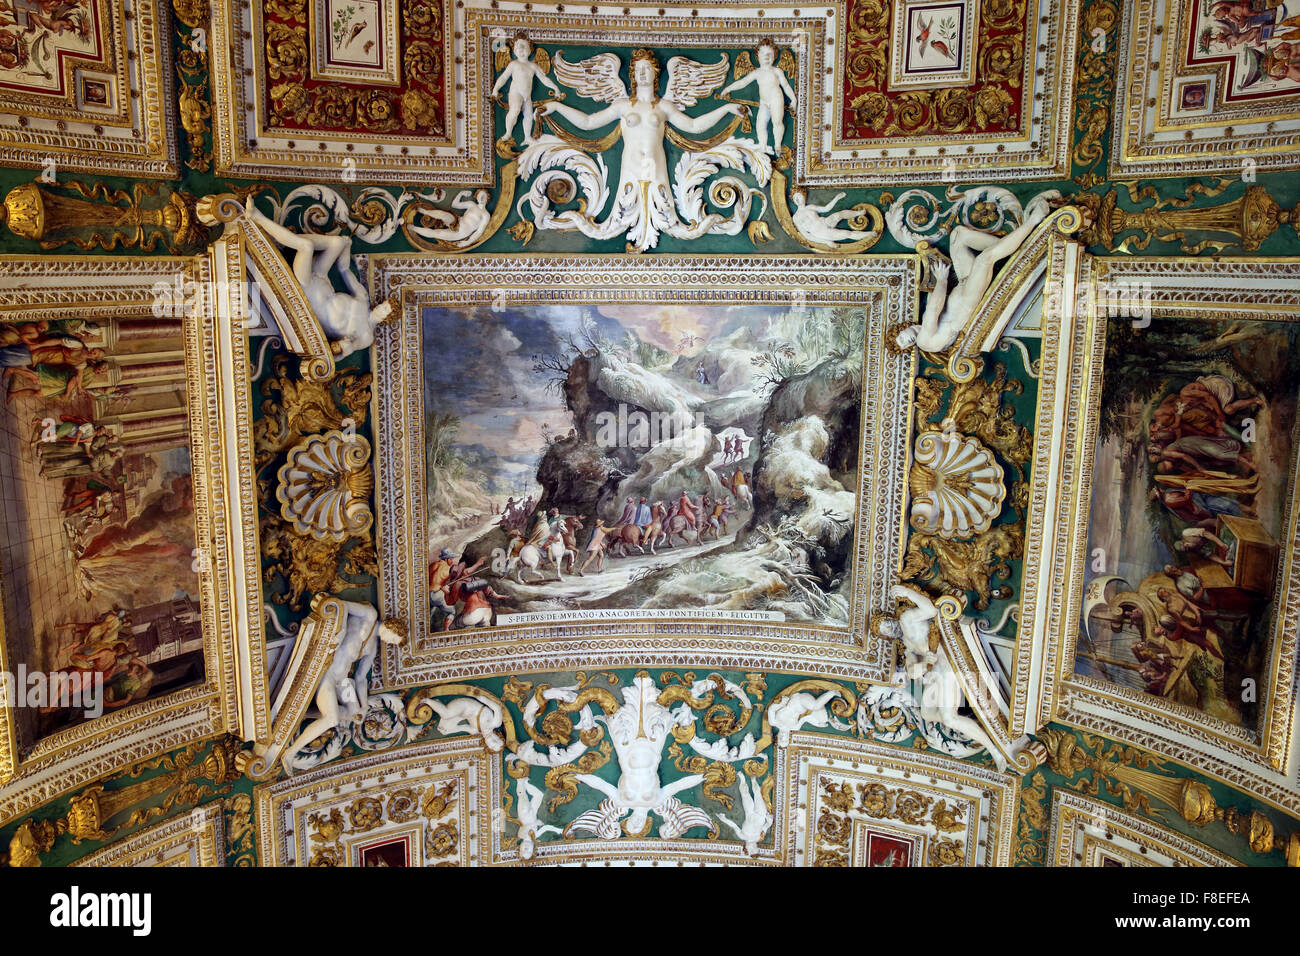 Frescoes lining the vaulted ceiling of the Gallery of Maps in the Vatican Museum. Stock Photo